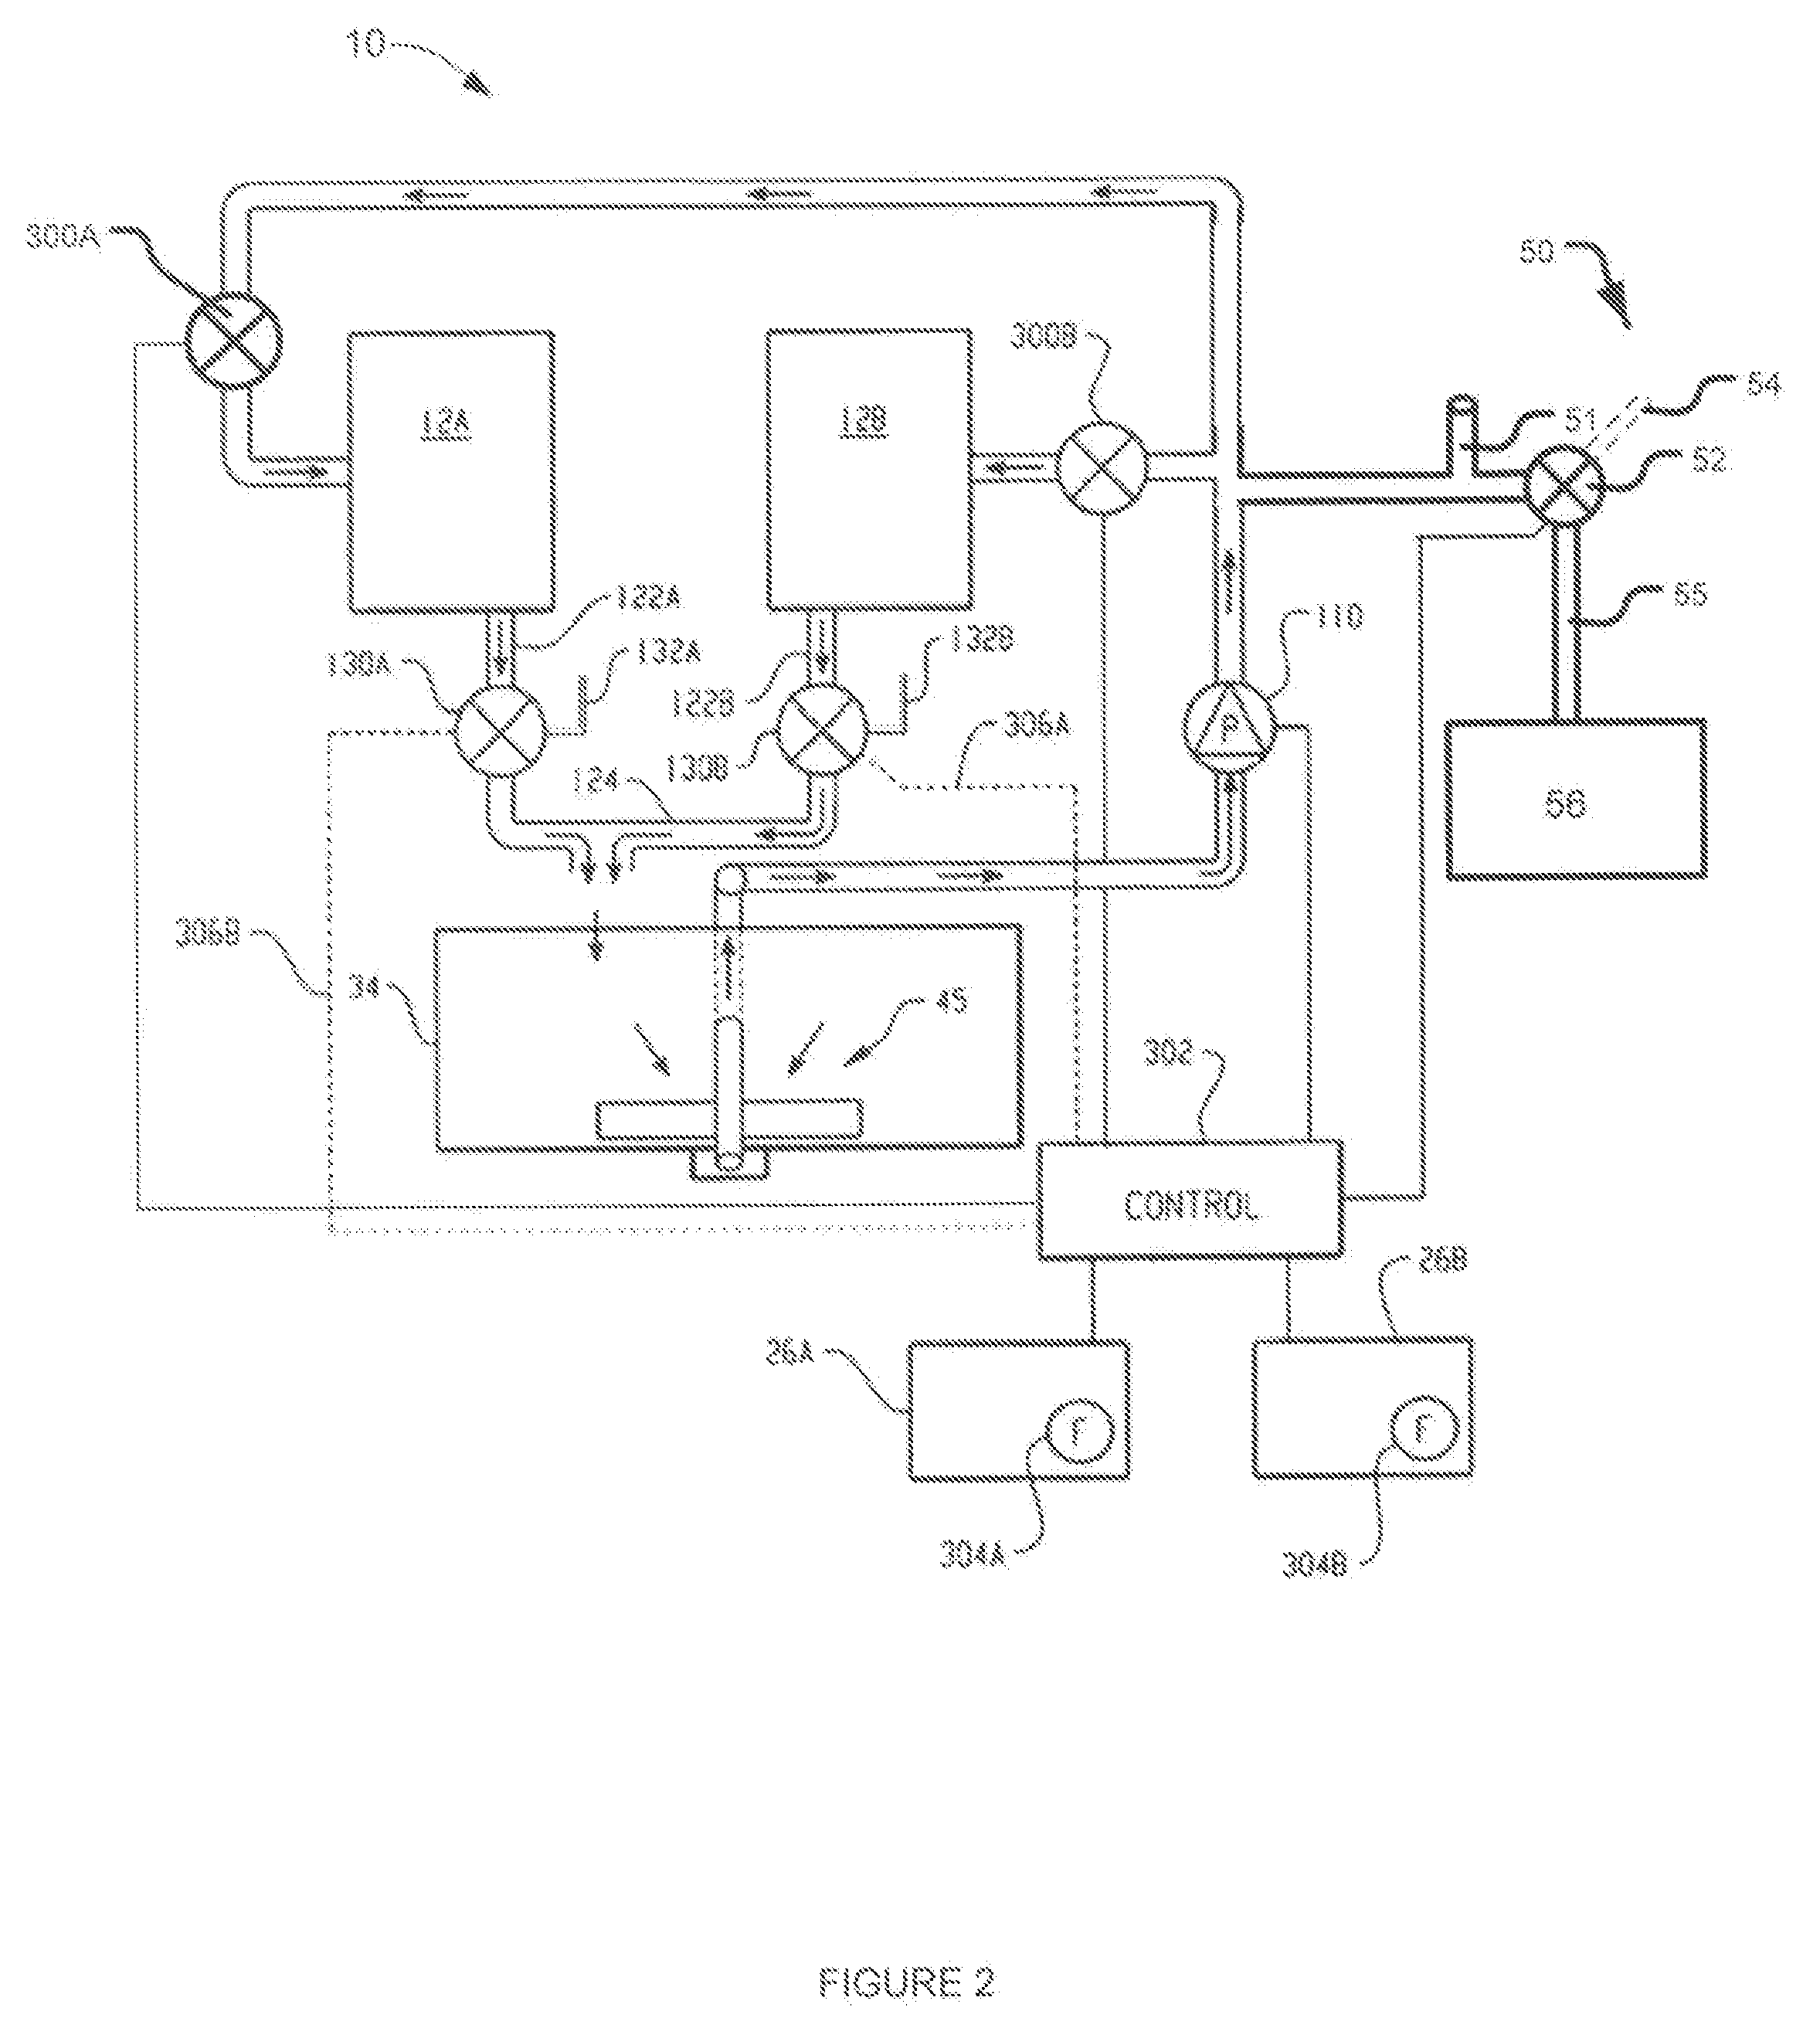 Oil reclamation device and process